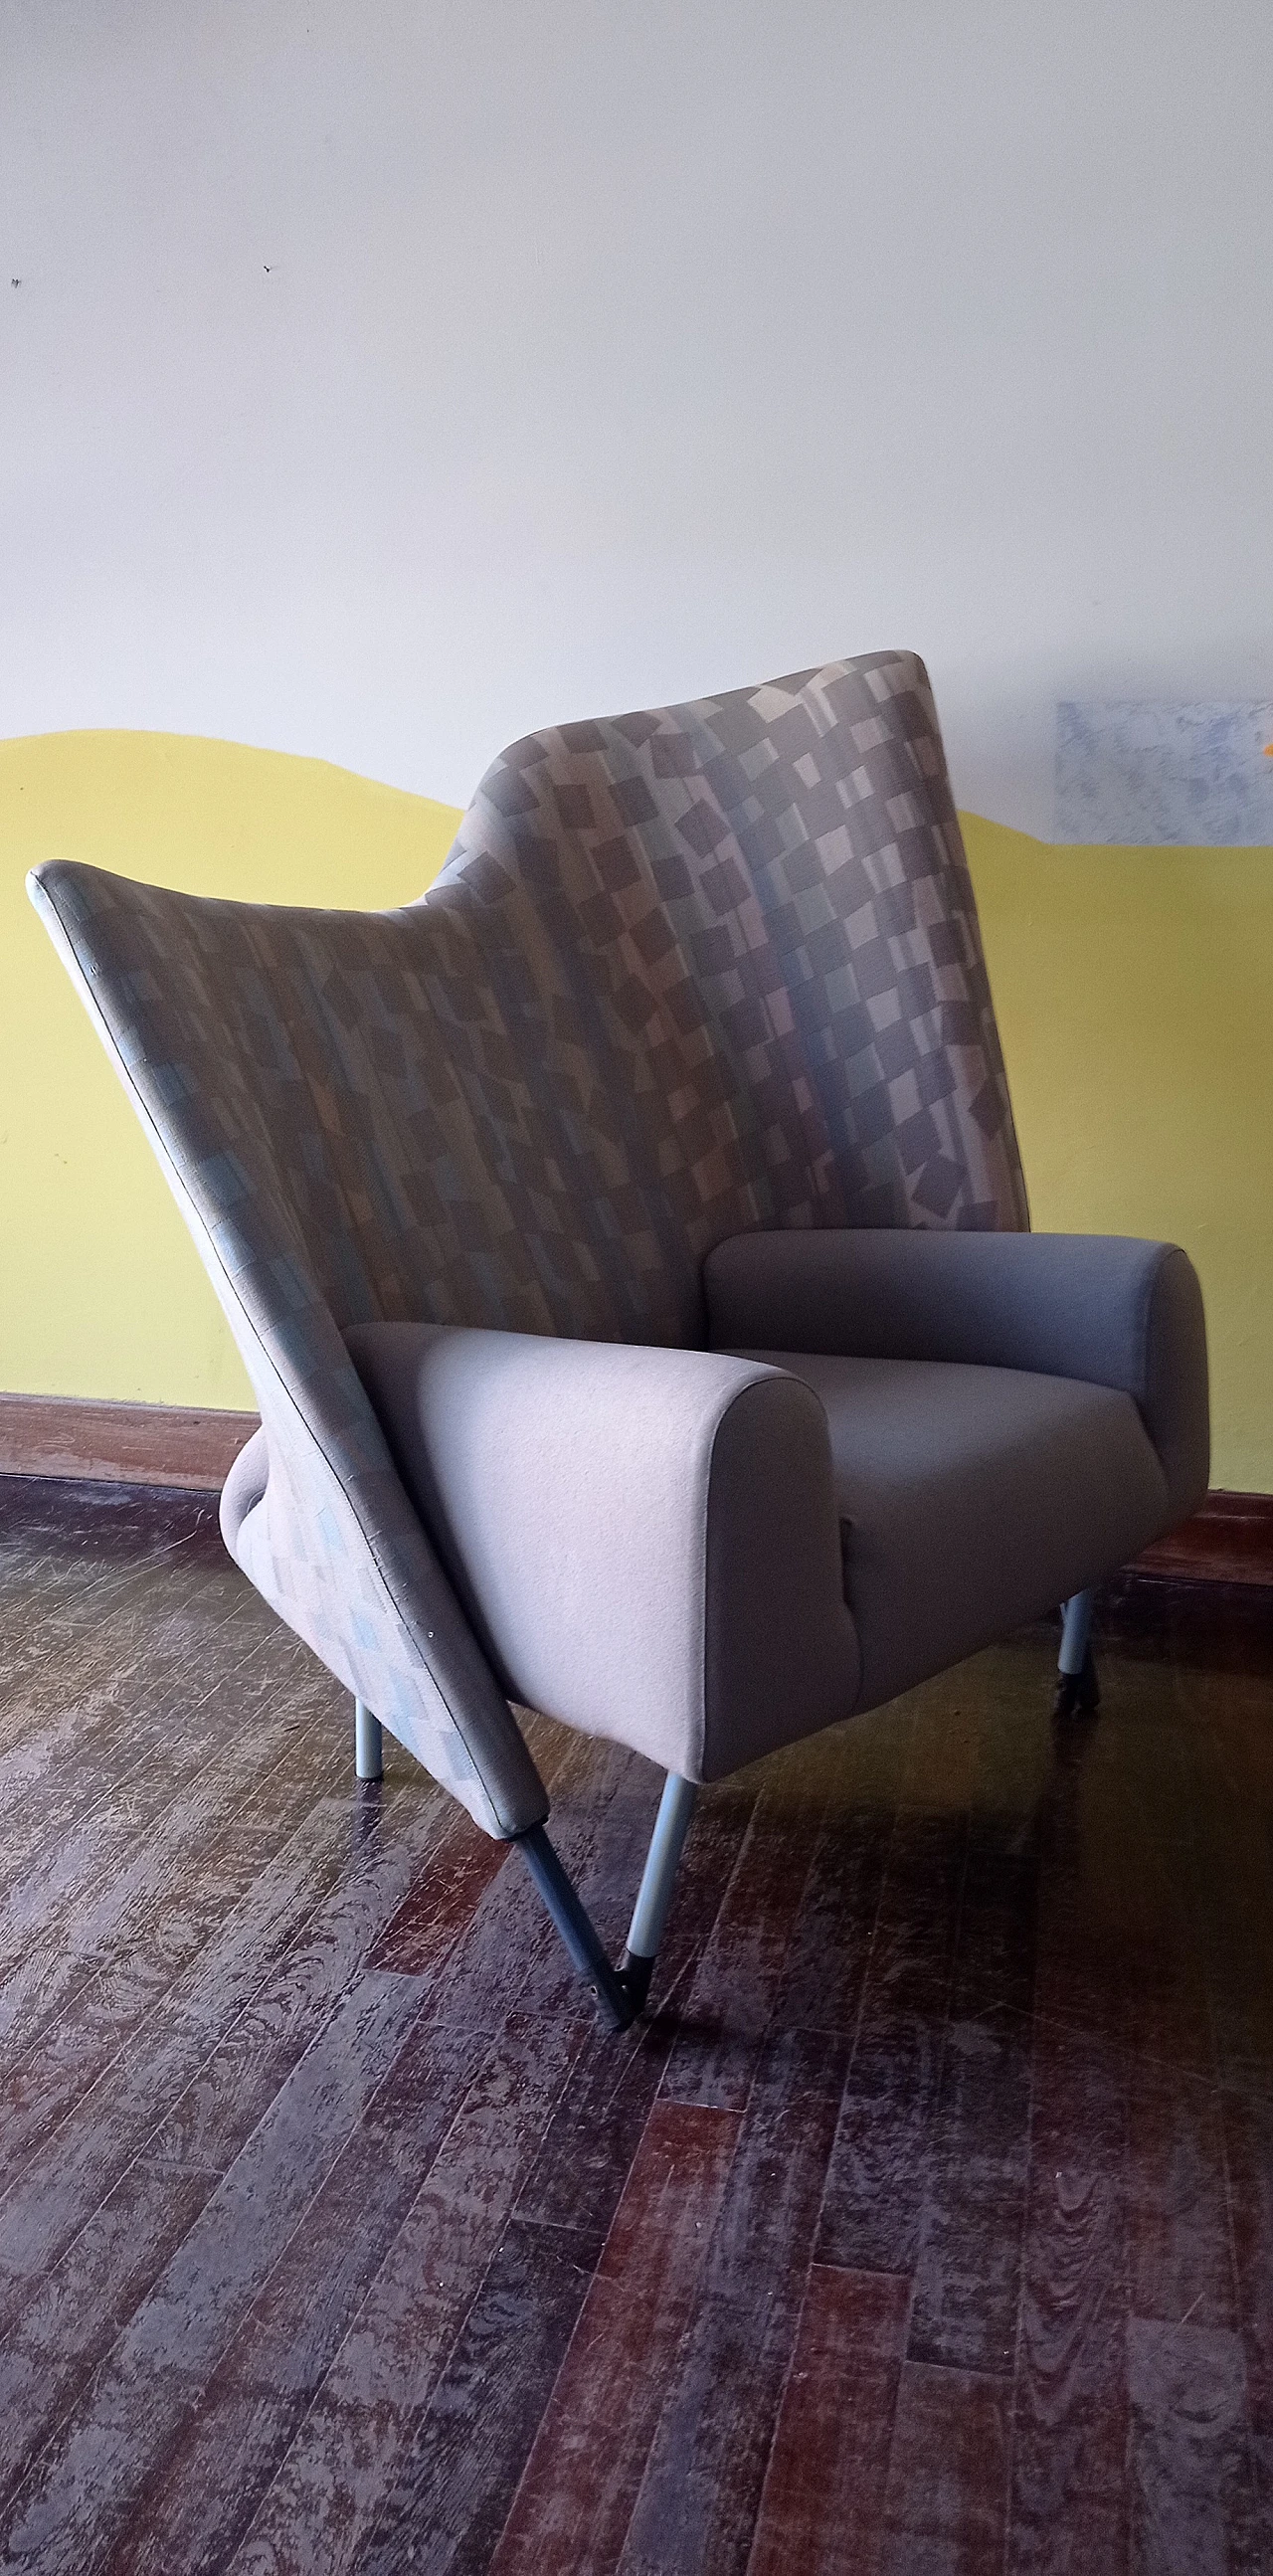 Torsi armchair in geometric fabric by Paolo Deganello for Cassina 194